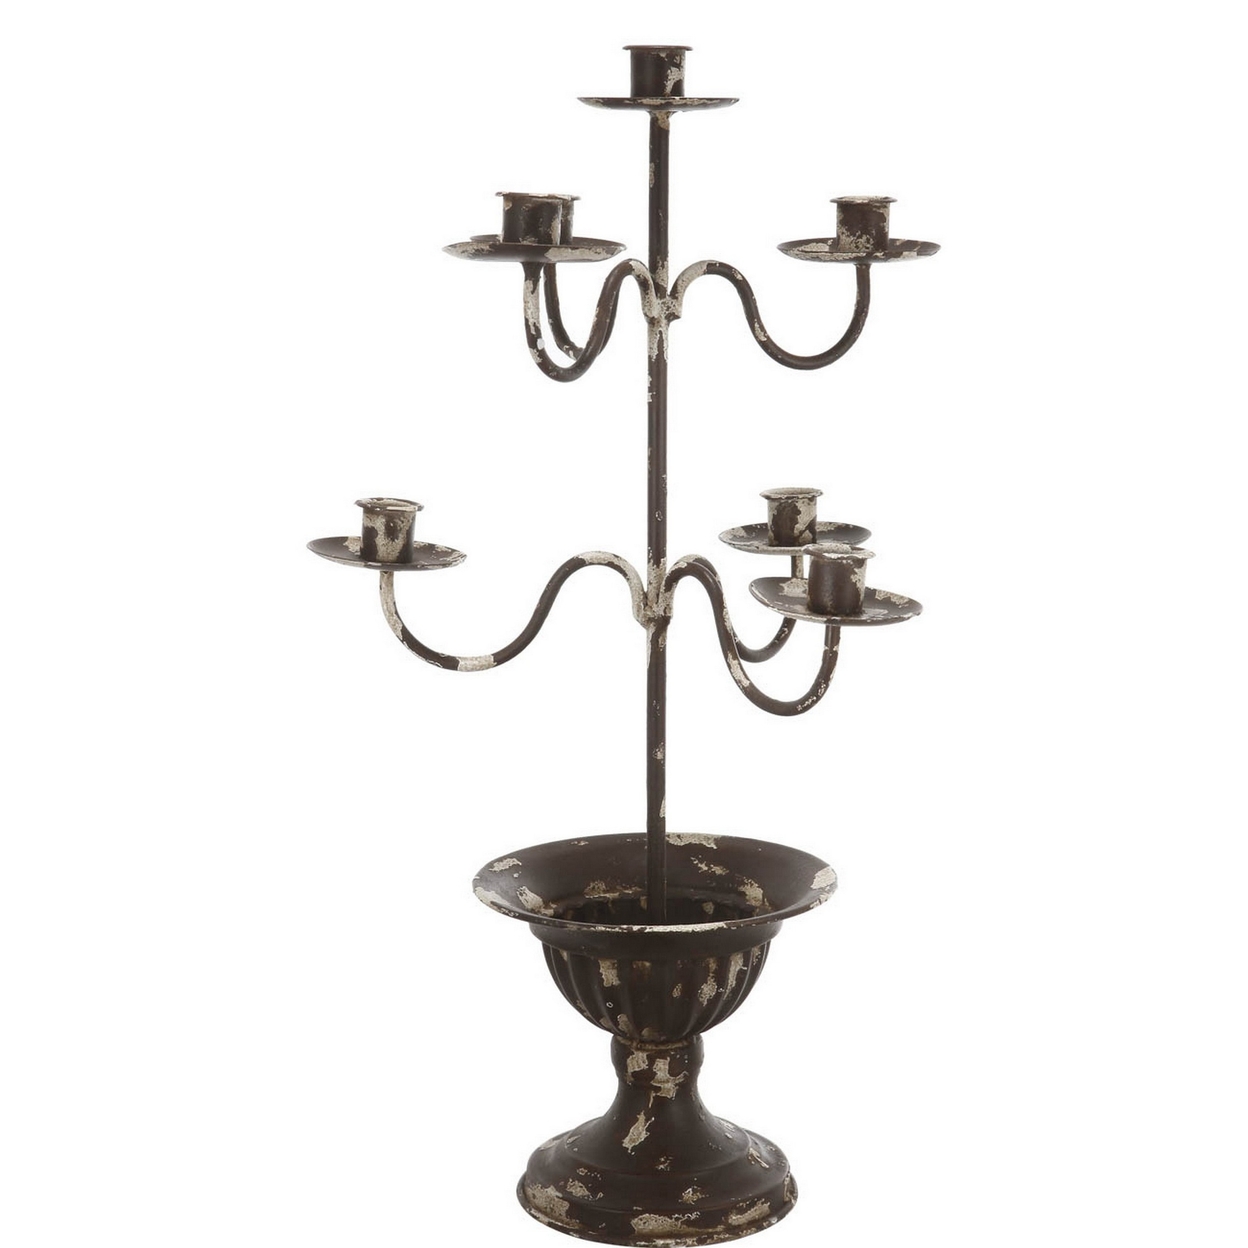 16 Inch Candle Holder With 7 Slots, Candelabra Style Distressed Brown Metal- Saltoro Sherpi